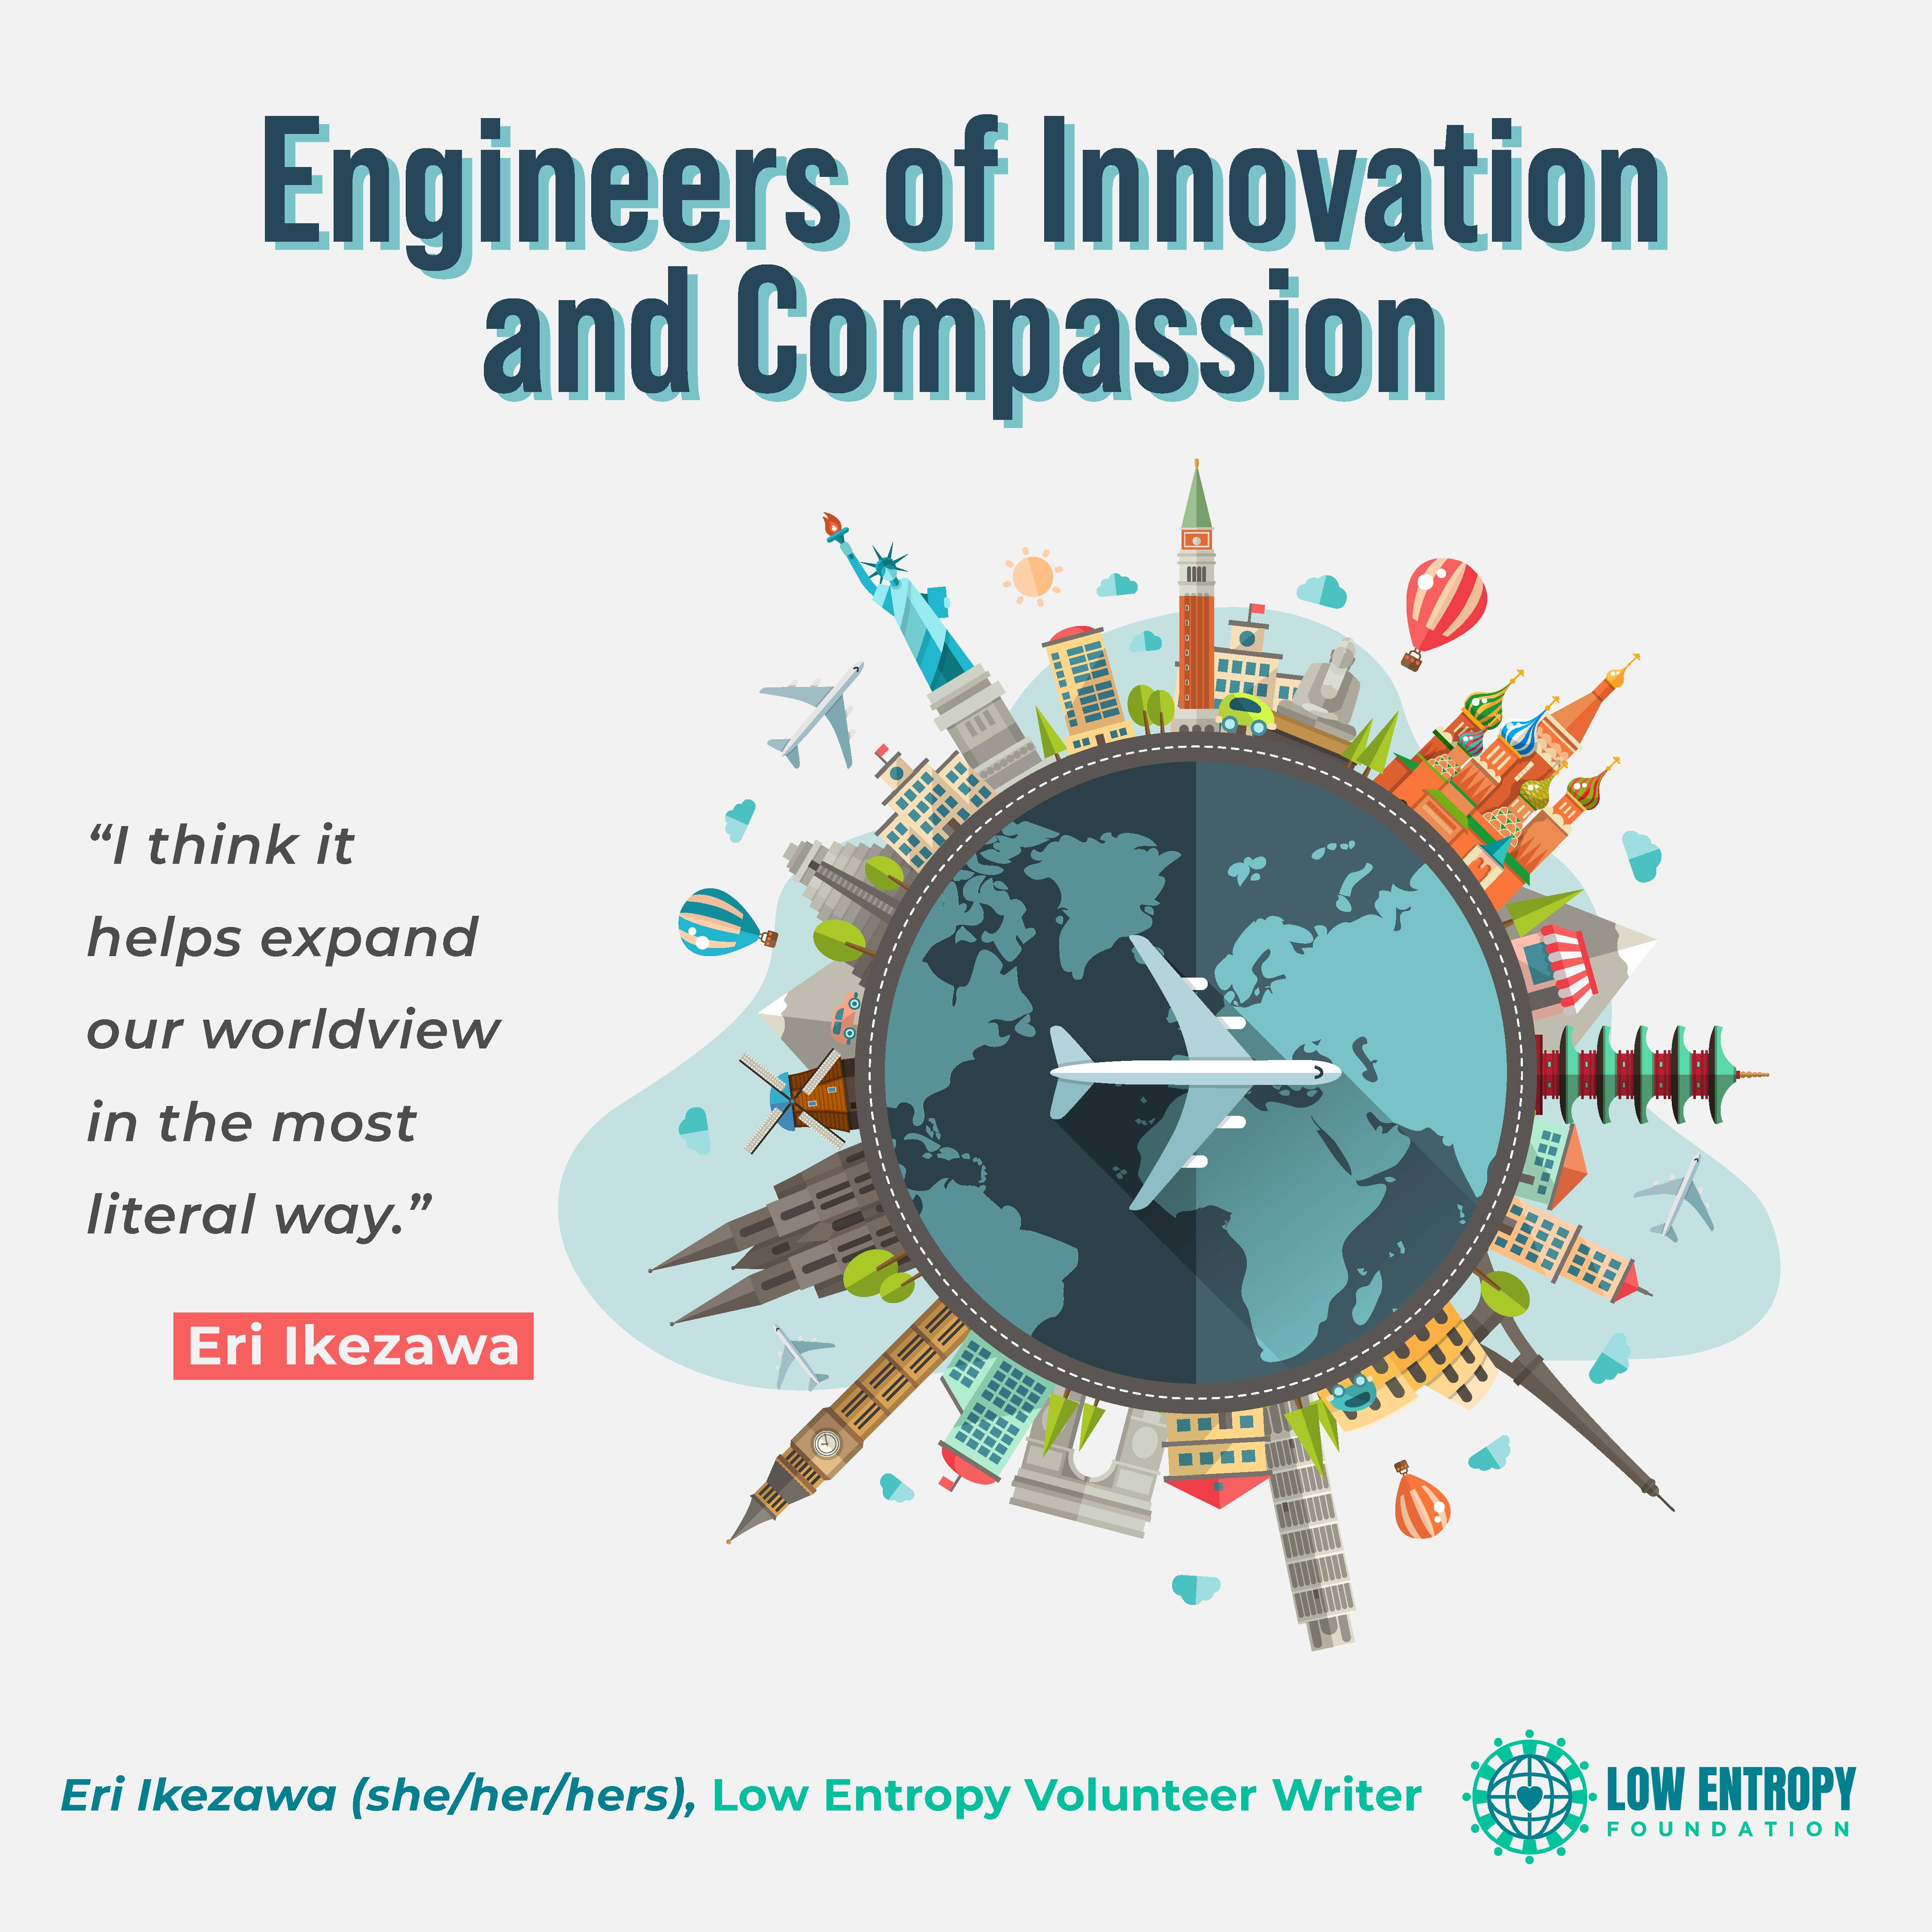 Engineers of Innovation and Compassion